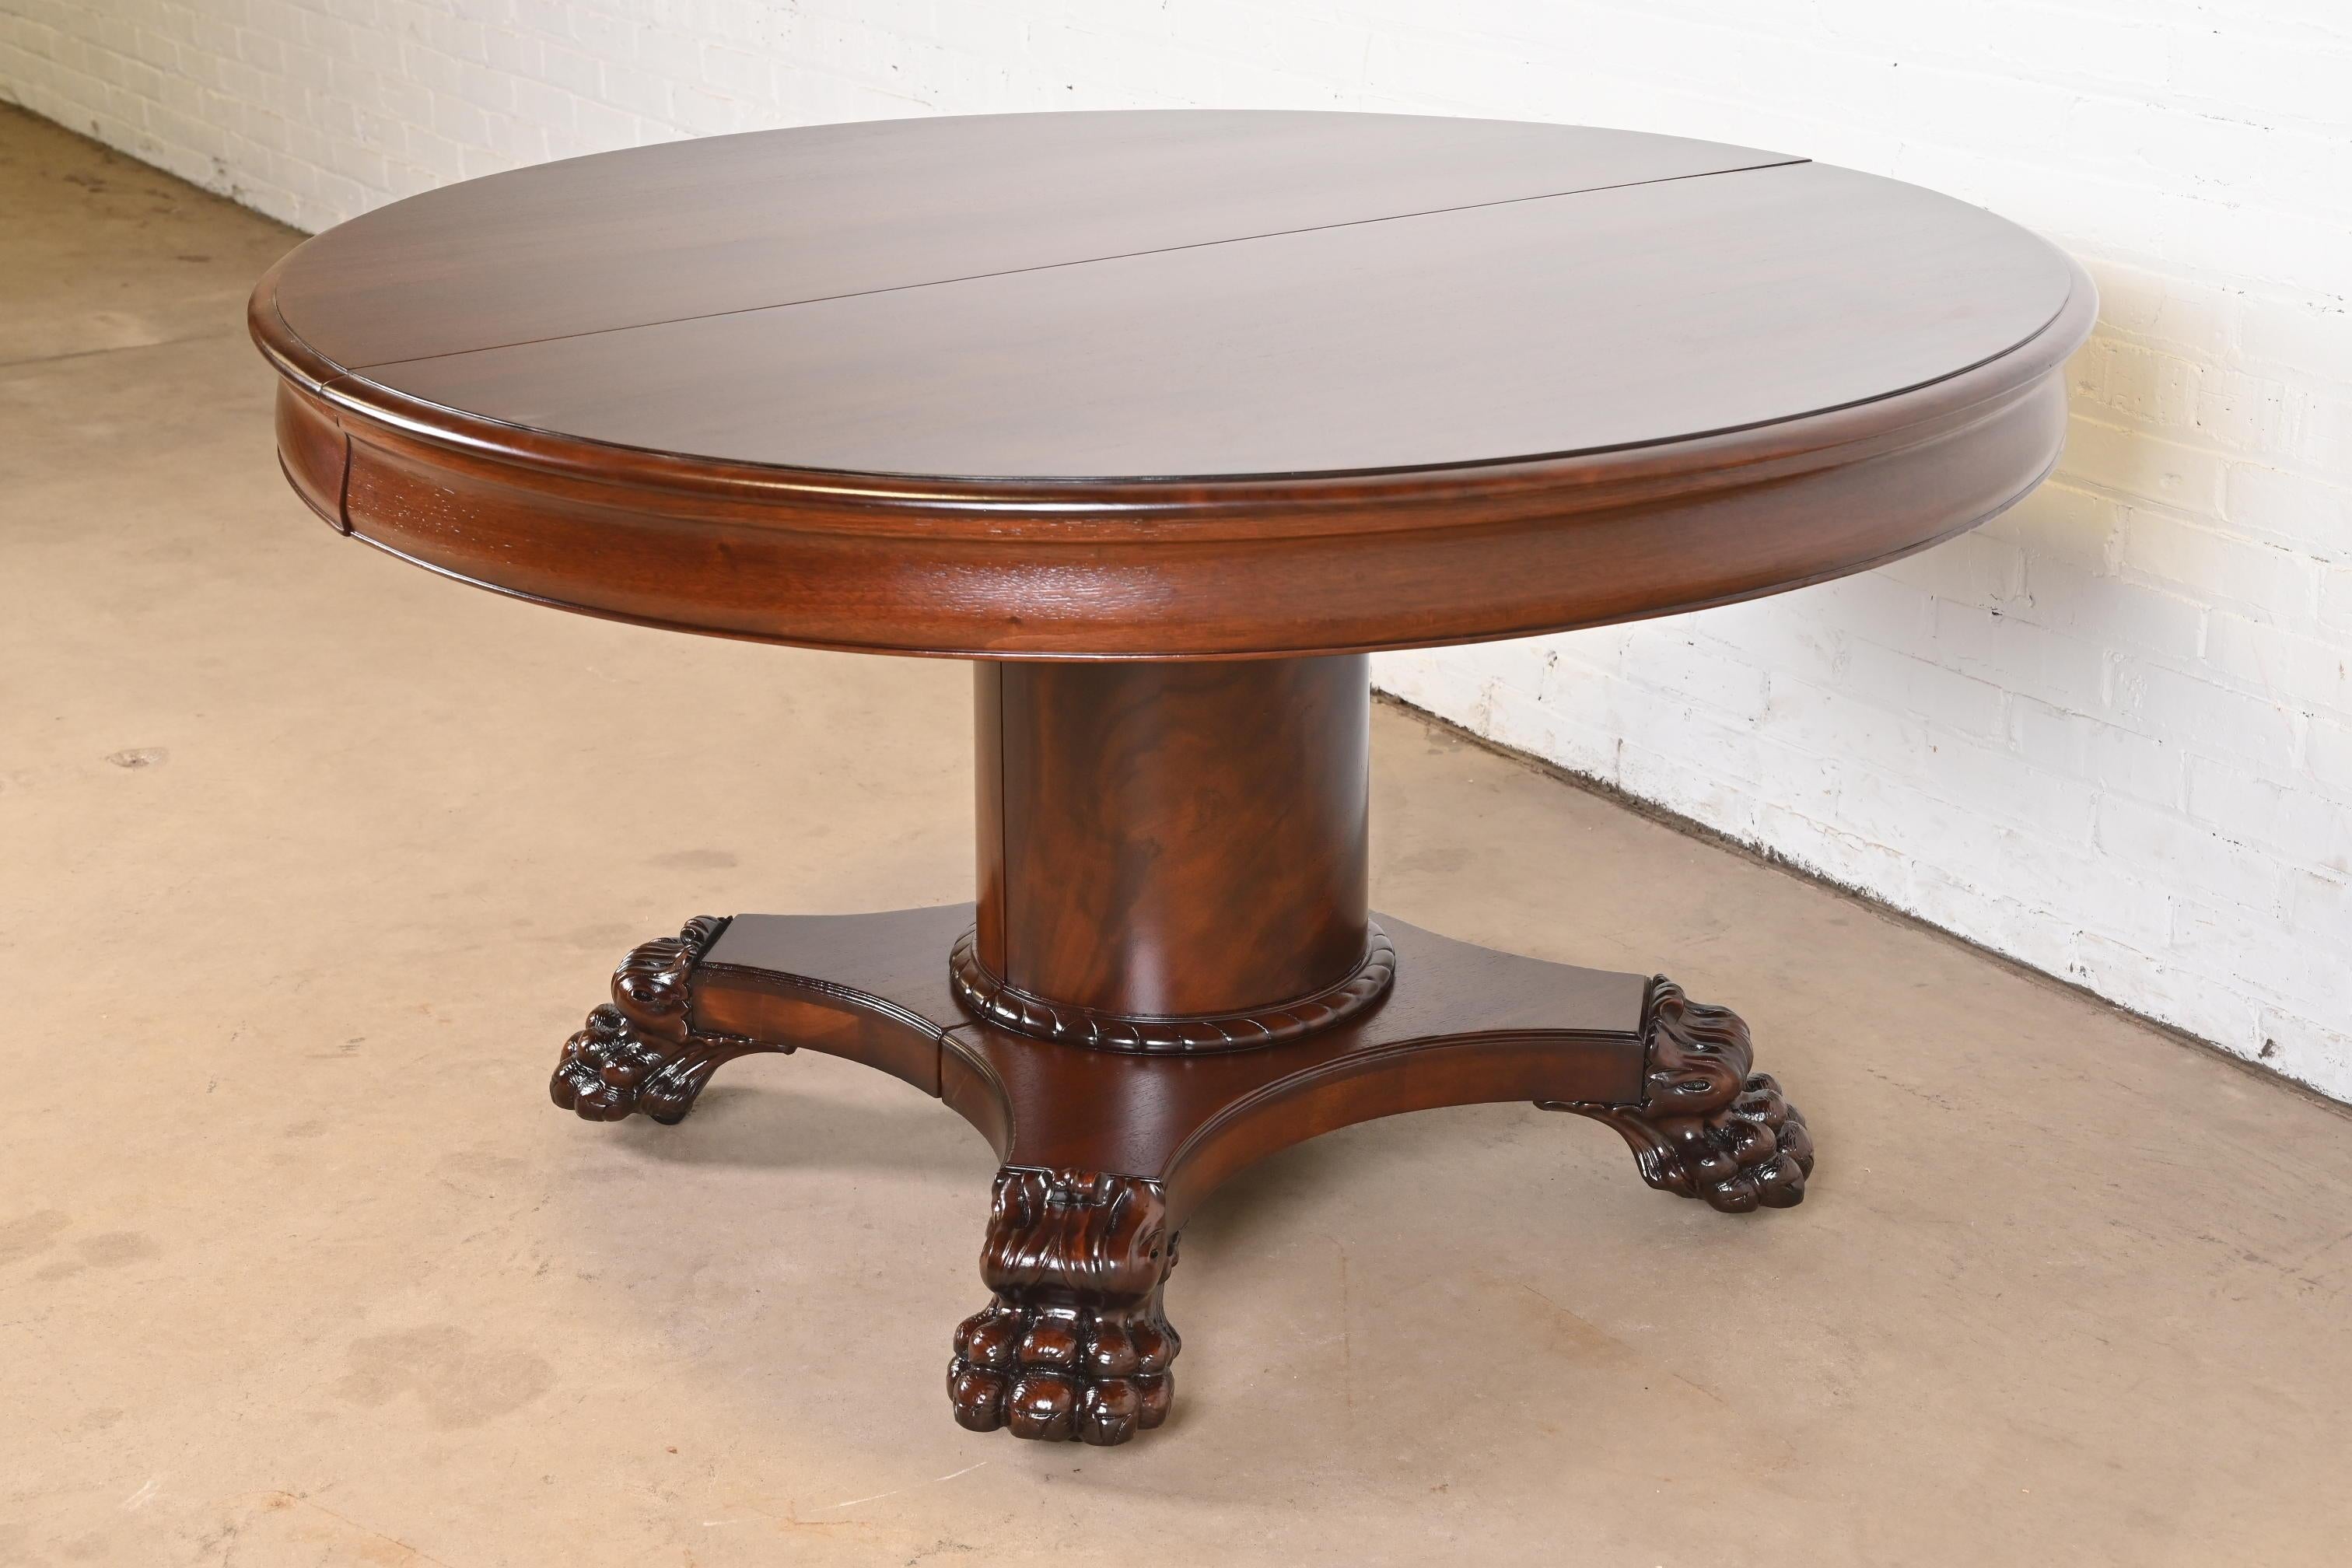 An outstanding antique Victorian pedestal extension dining table

Attributed to R.J. Horner & Co.

USA, Late 19th Century

Gorgeous mahogany, with ornate carved expanding pedestal with paw feet.

Measures: 54